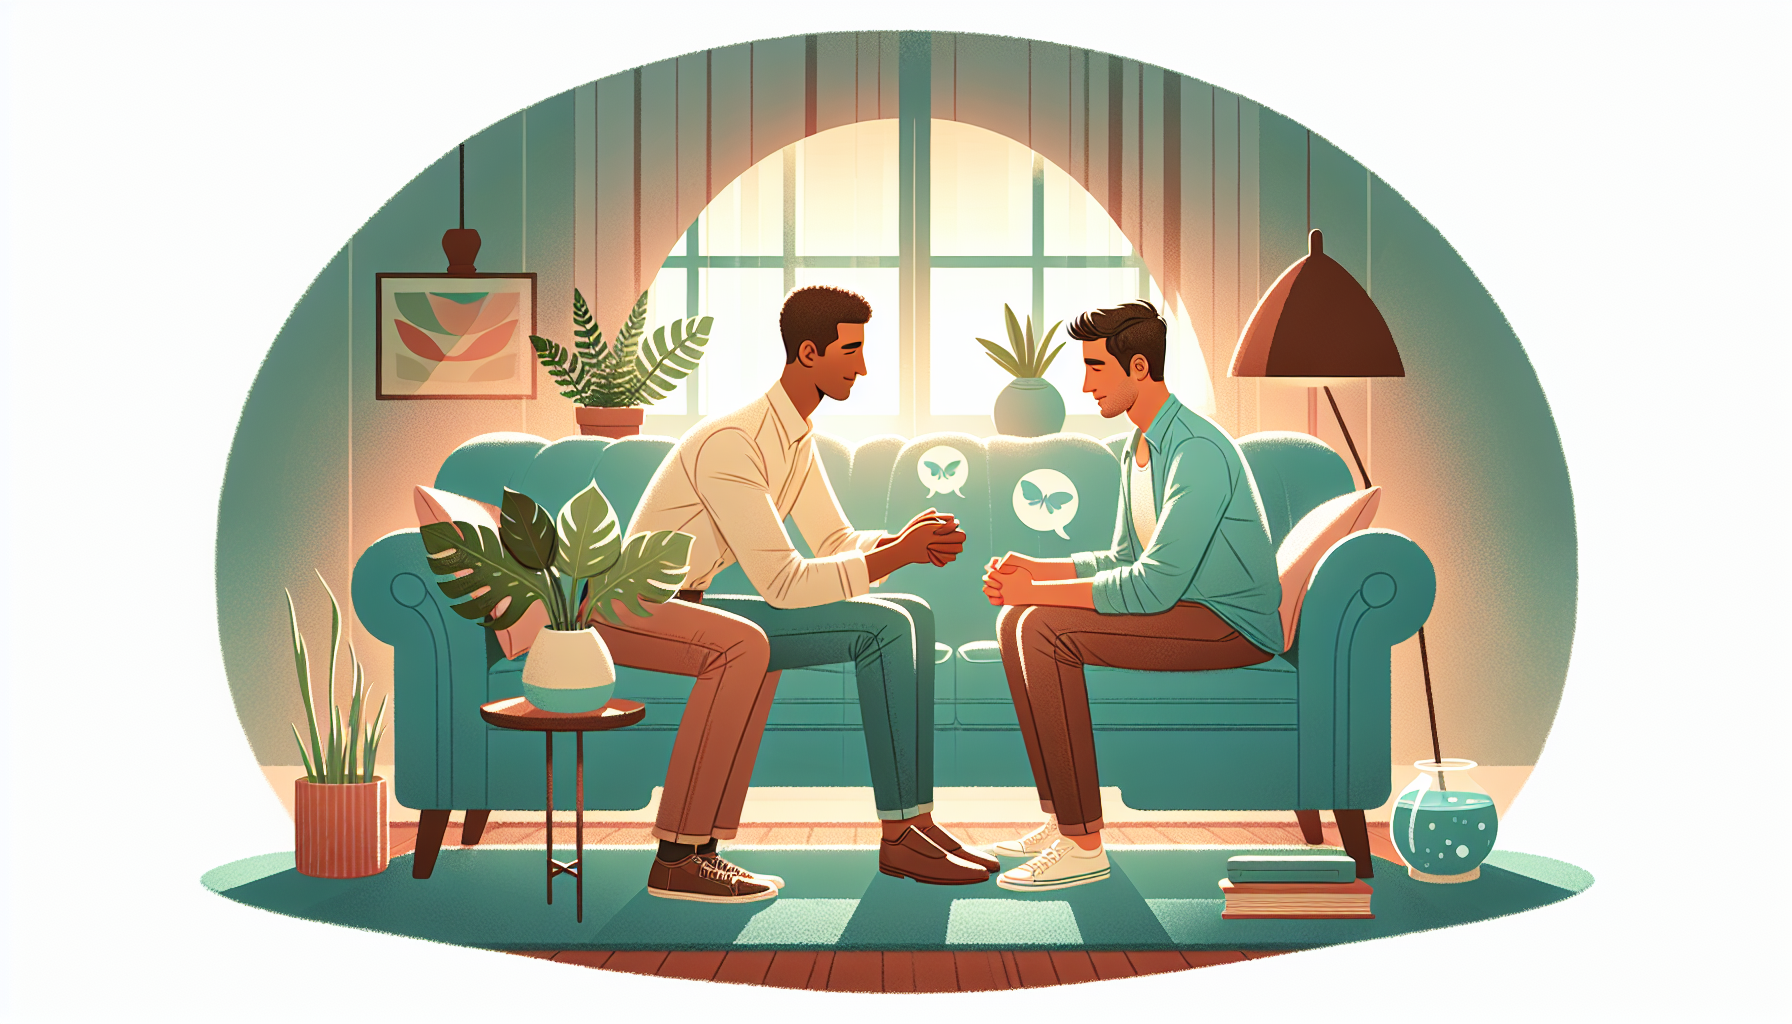 Illustration of a supportive and empathetic therapy session for gay couples